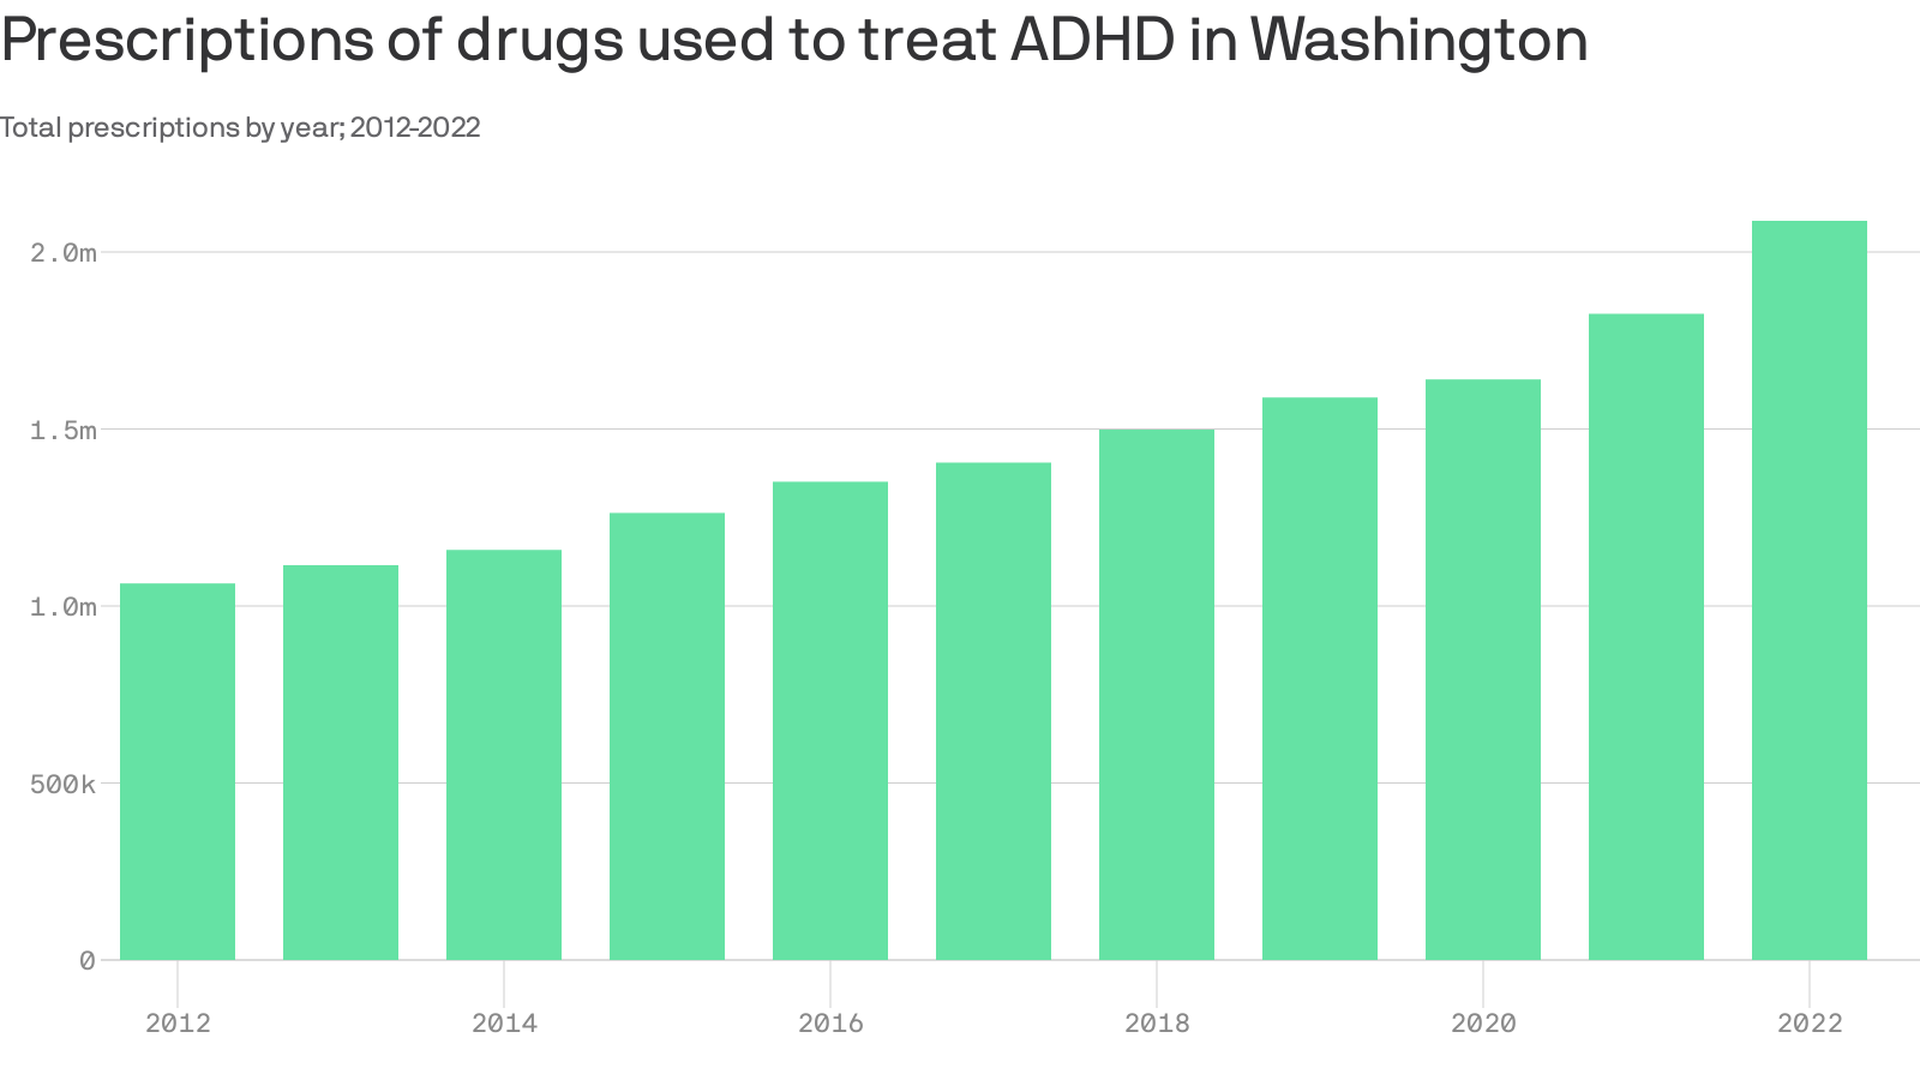 A column chart showing a rising annual number of prescriptions for medications used to treat ADHD in Washington state, from just over 1 million annually in 2012 to more than 2 million annually in 2022. 